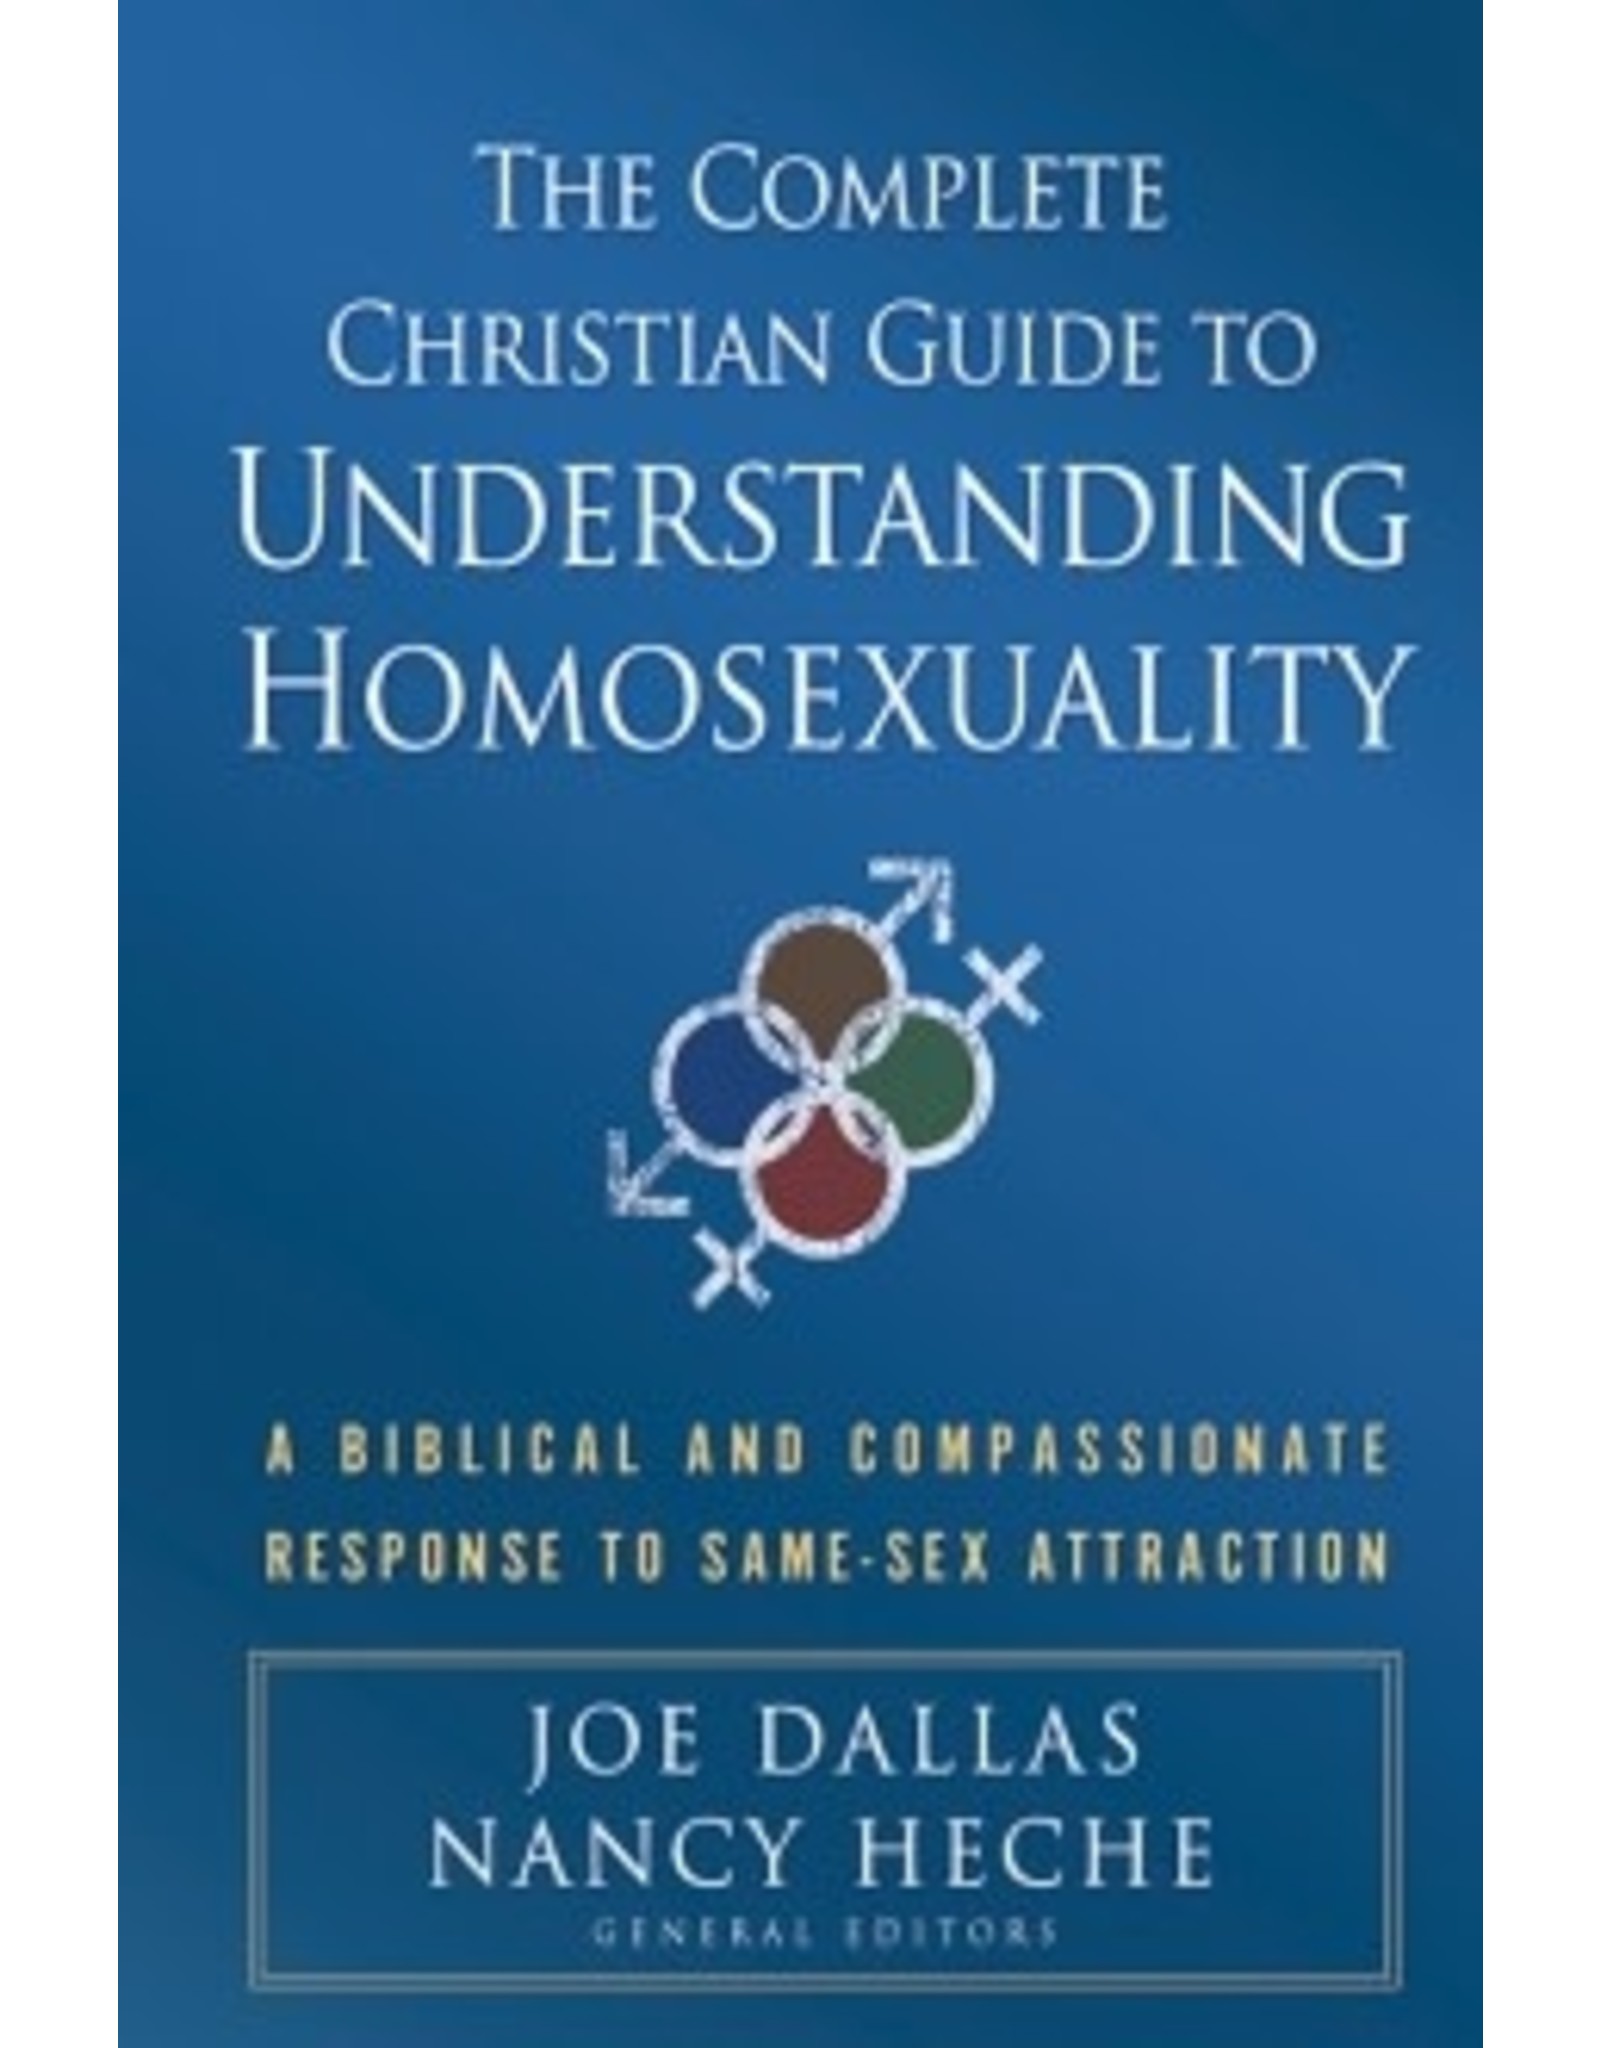 Joe Dallas The Complete Christian Guide to Understanding Homosexuality